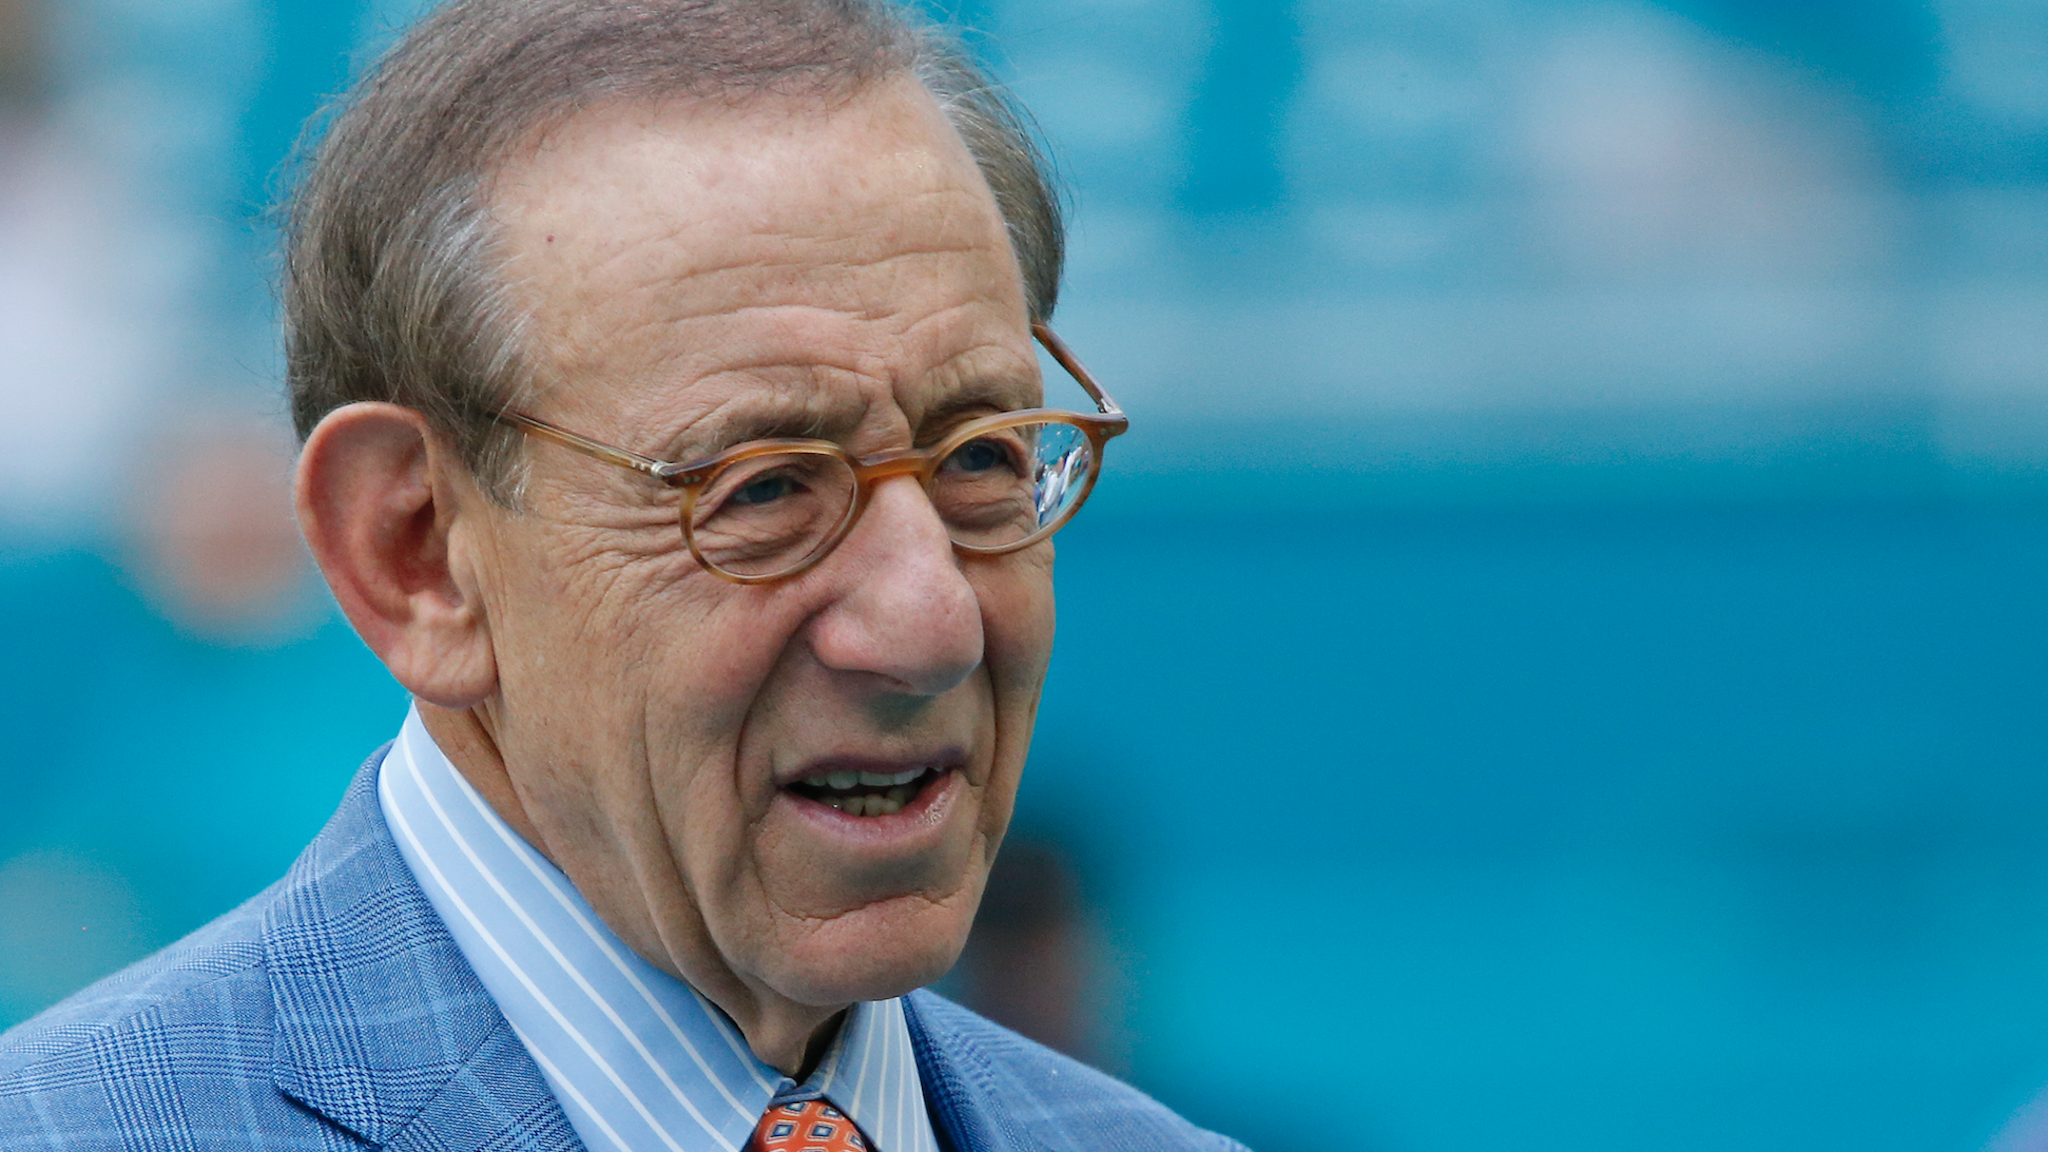 Chairman of the Board/Managing General Partner Stephen M. Ross of the Miami Dolphins watches the team warm up prior to the NFL game against the New York Jets on November 4, 2018 at Hard Rock Stadium in Miami Gardens, Florida. The Dolphins defeated the Jet